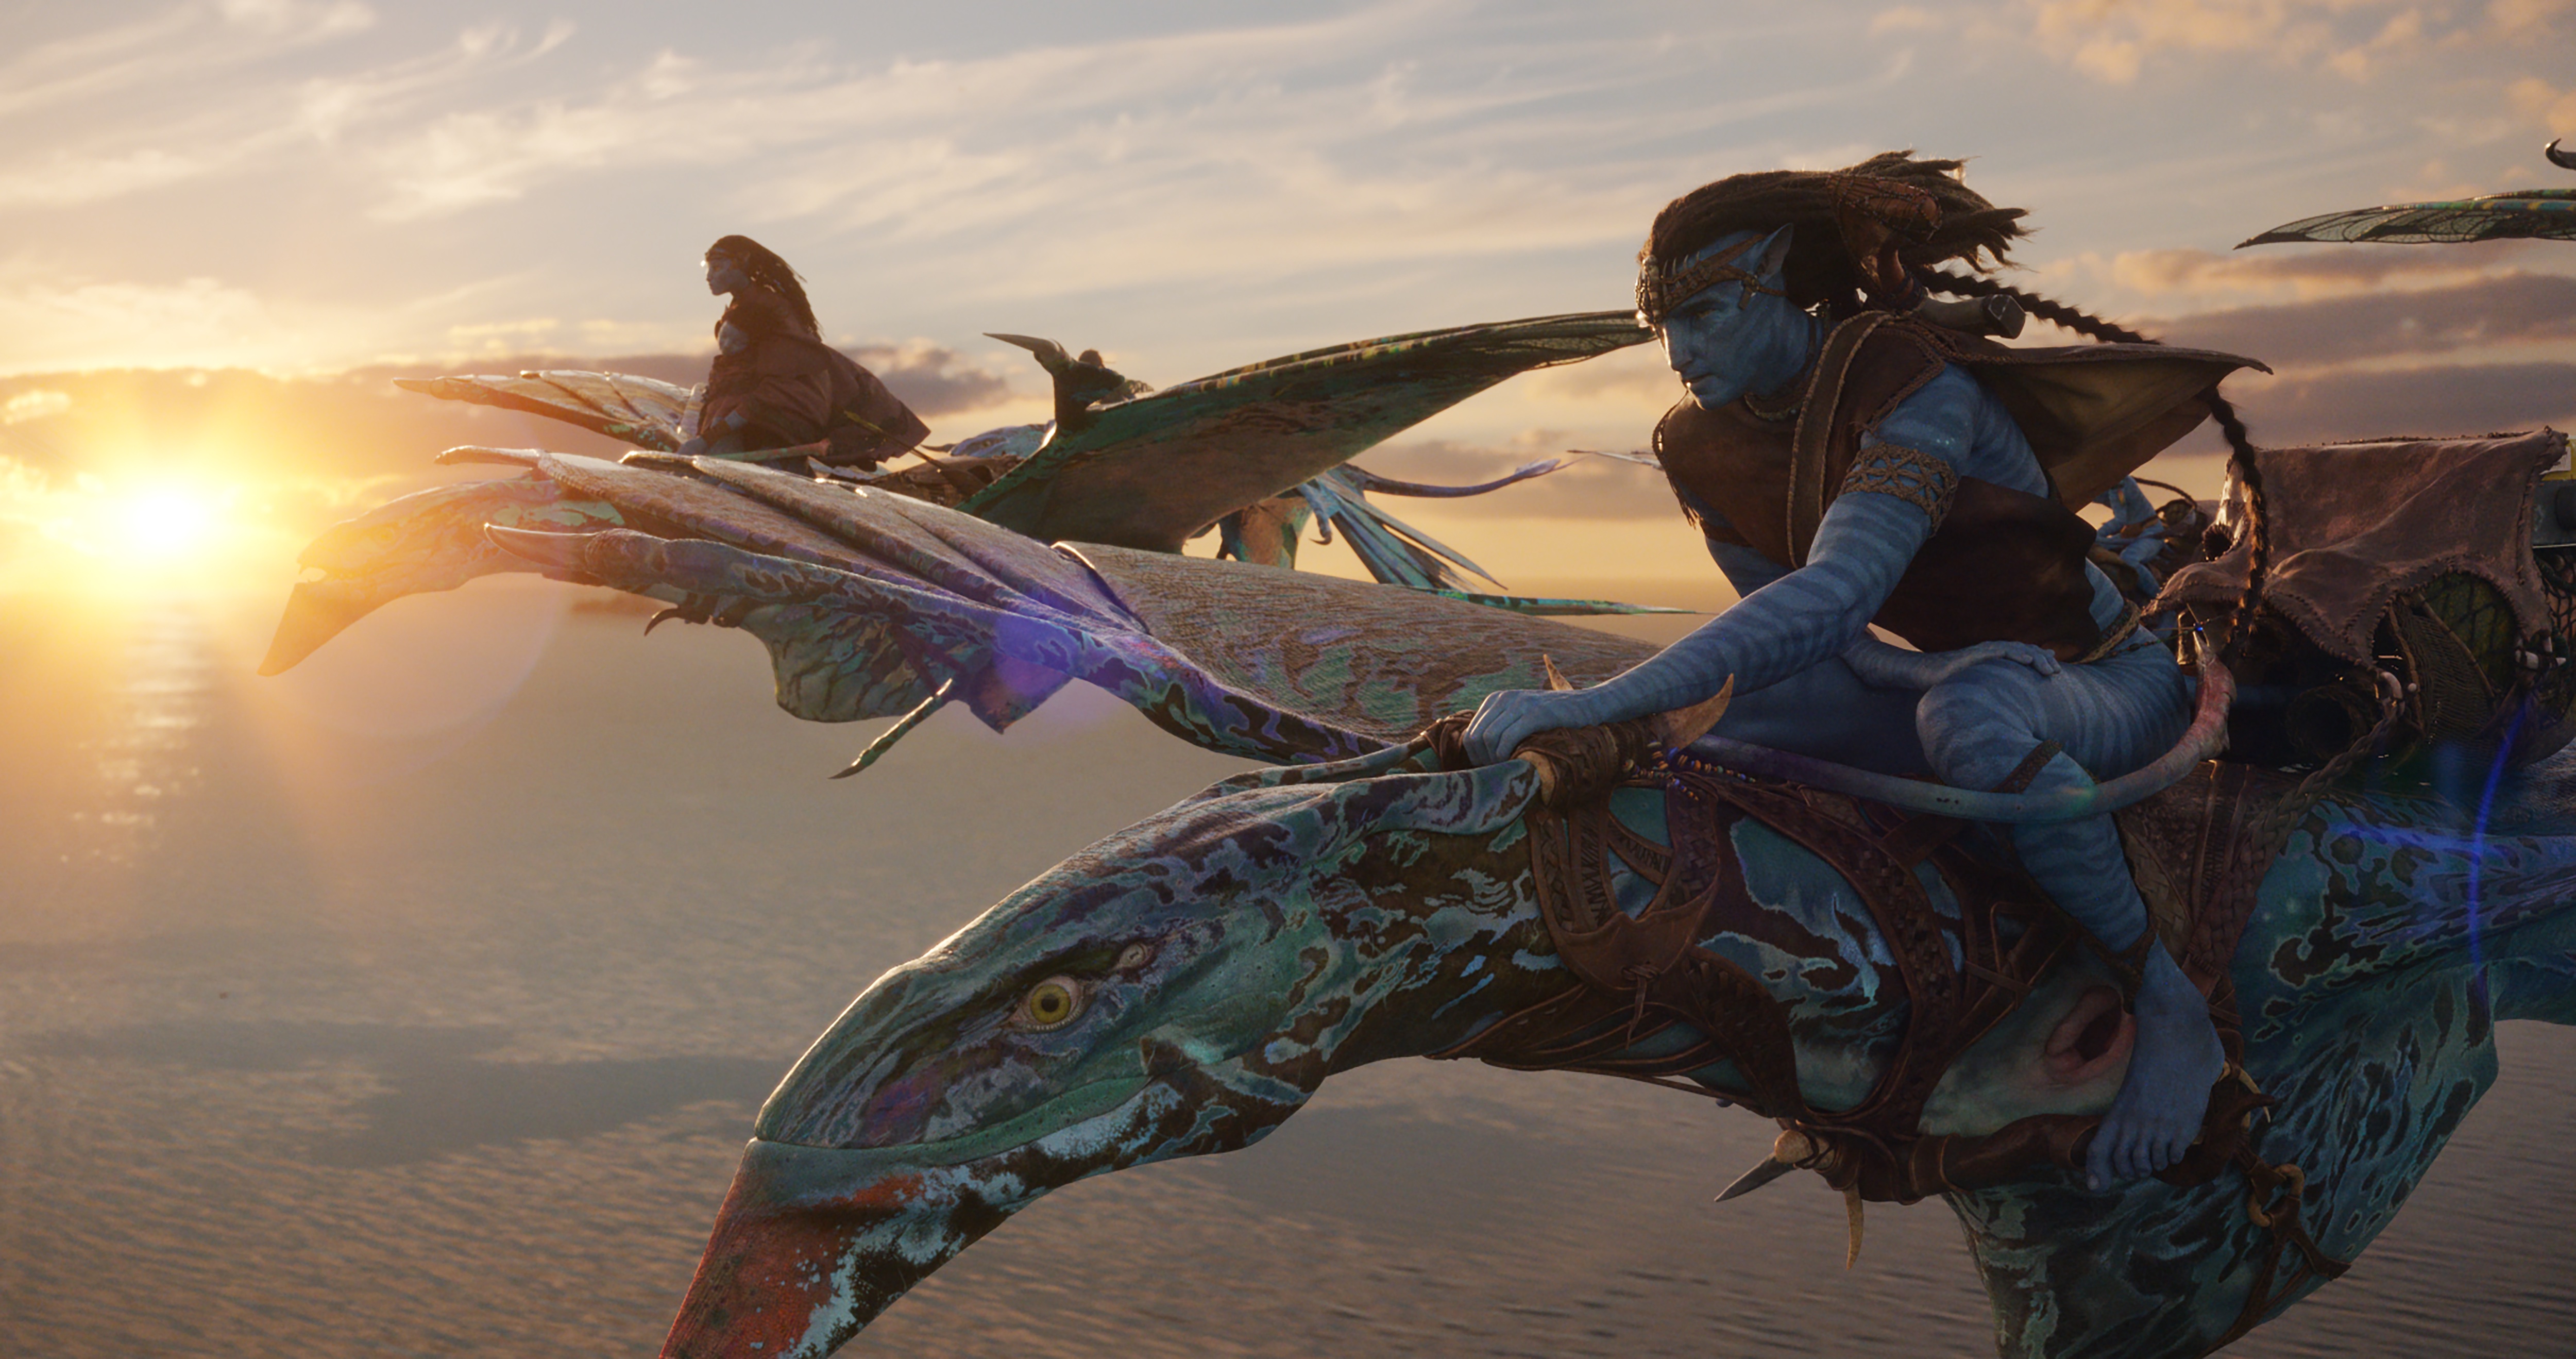 Na’vi mates Neytiri (Zoe Saldaña) and Jake (Sam Worthington) fly on their mottled blue banshee mounts above the clouds with a sunset behind them in Avatar: The Way of Water